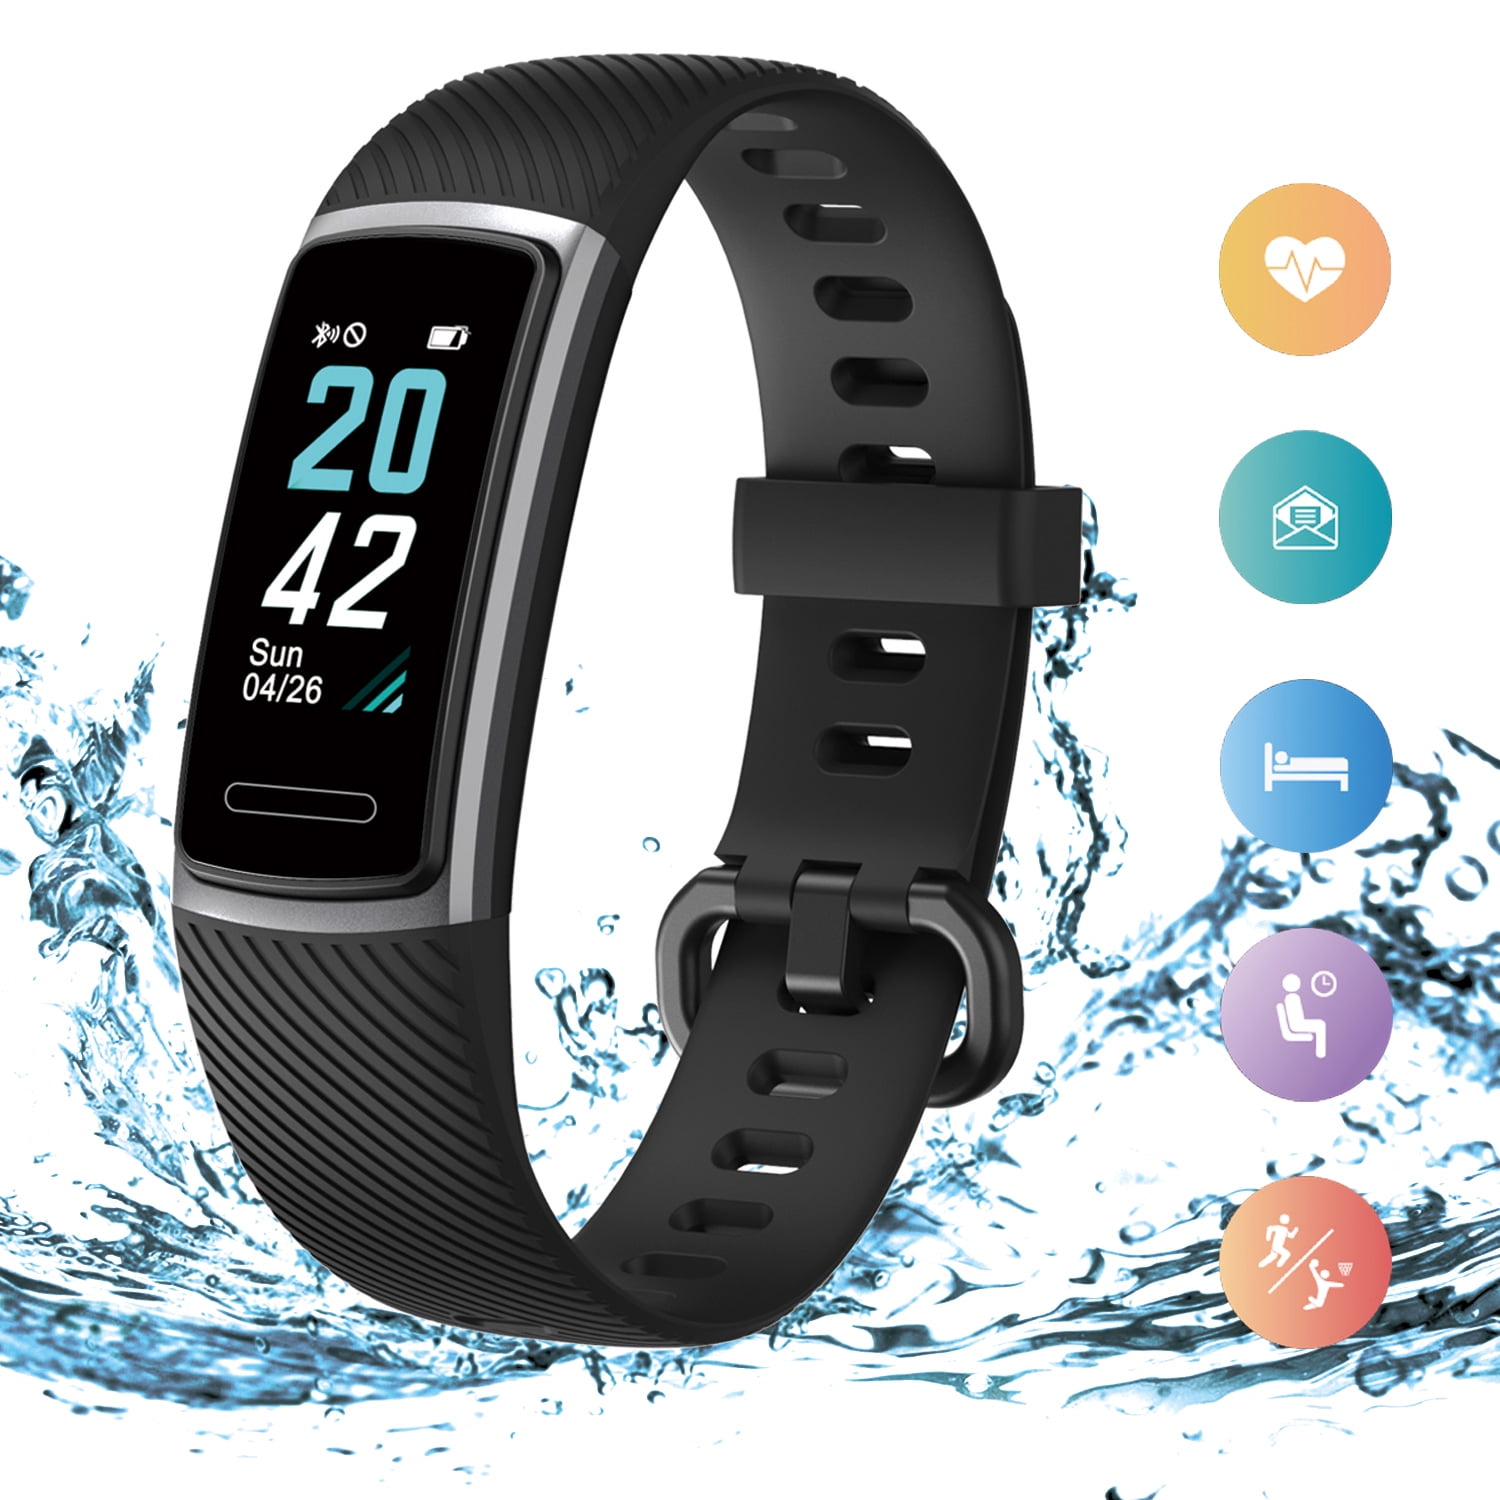 NFC Details about   Fitbit Charge 4 Special Edition Activity Tracker FREE SHIPPING !!!!!!! 